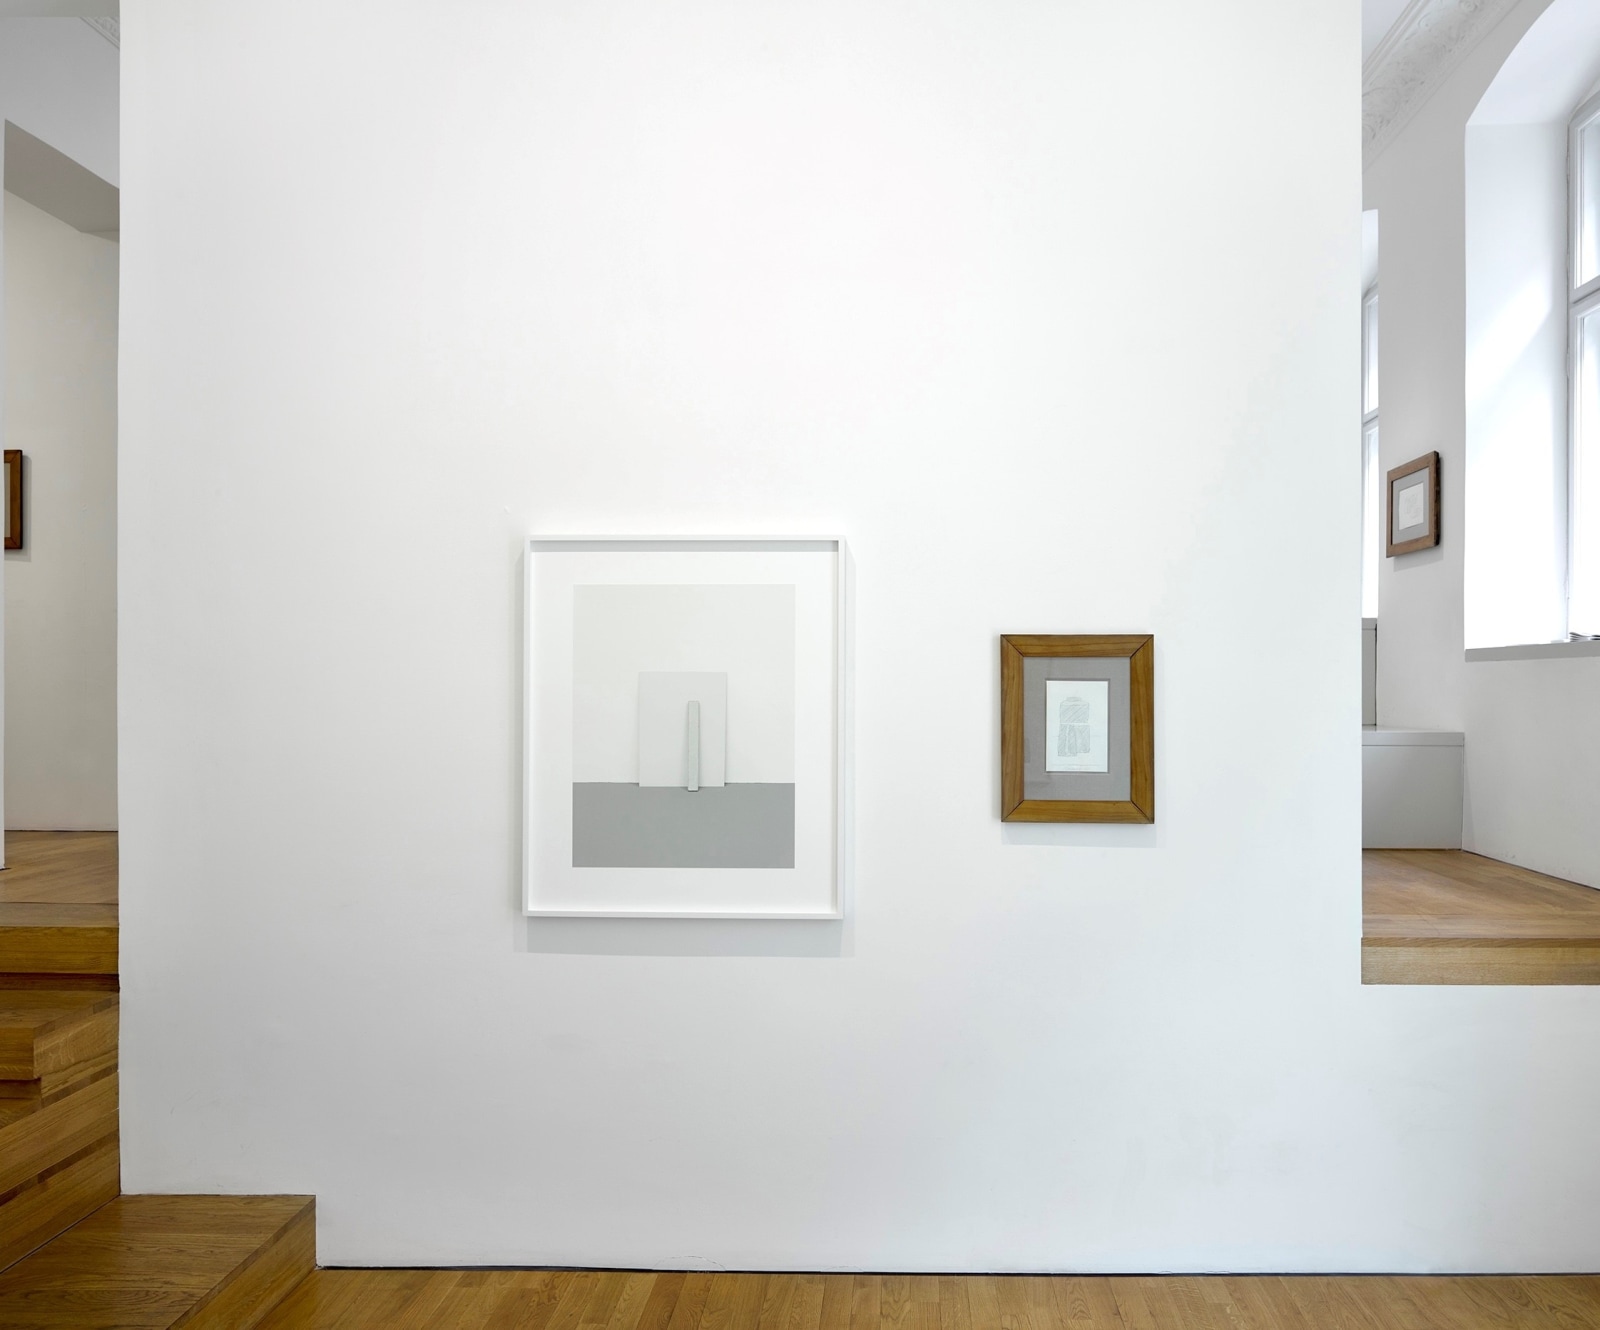 Installation view of photographs framed on the gallery's white walls